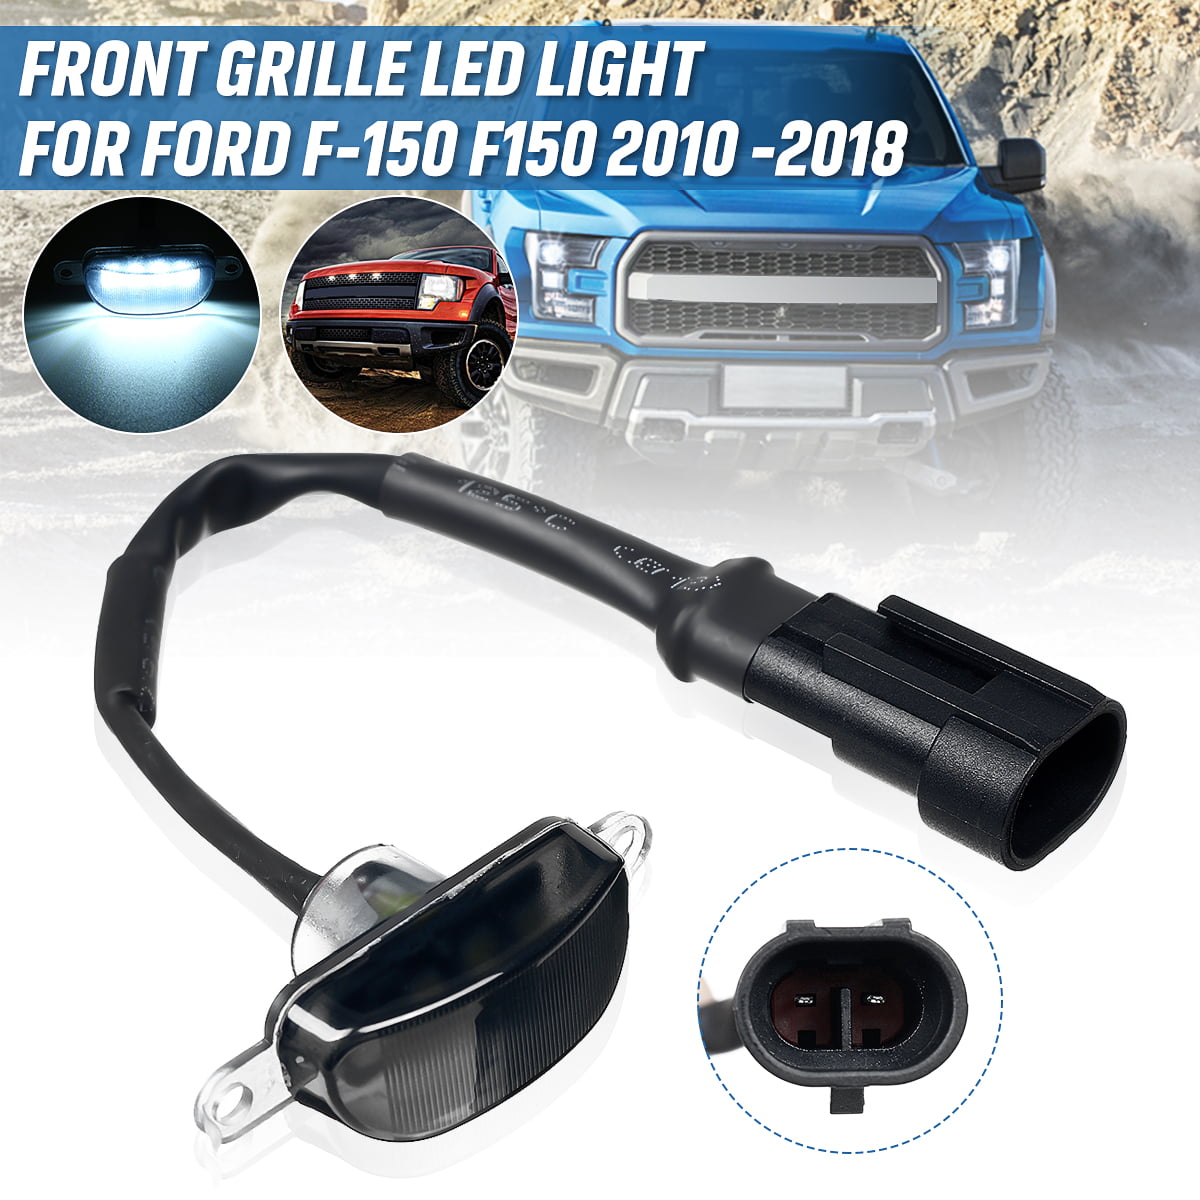 1pc Car Front Grille LED Light Raptor Style Grill Lamp for Ford F-150 F150 2015 2016 2017 